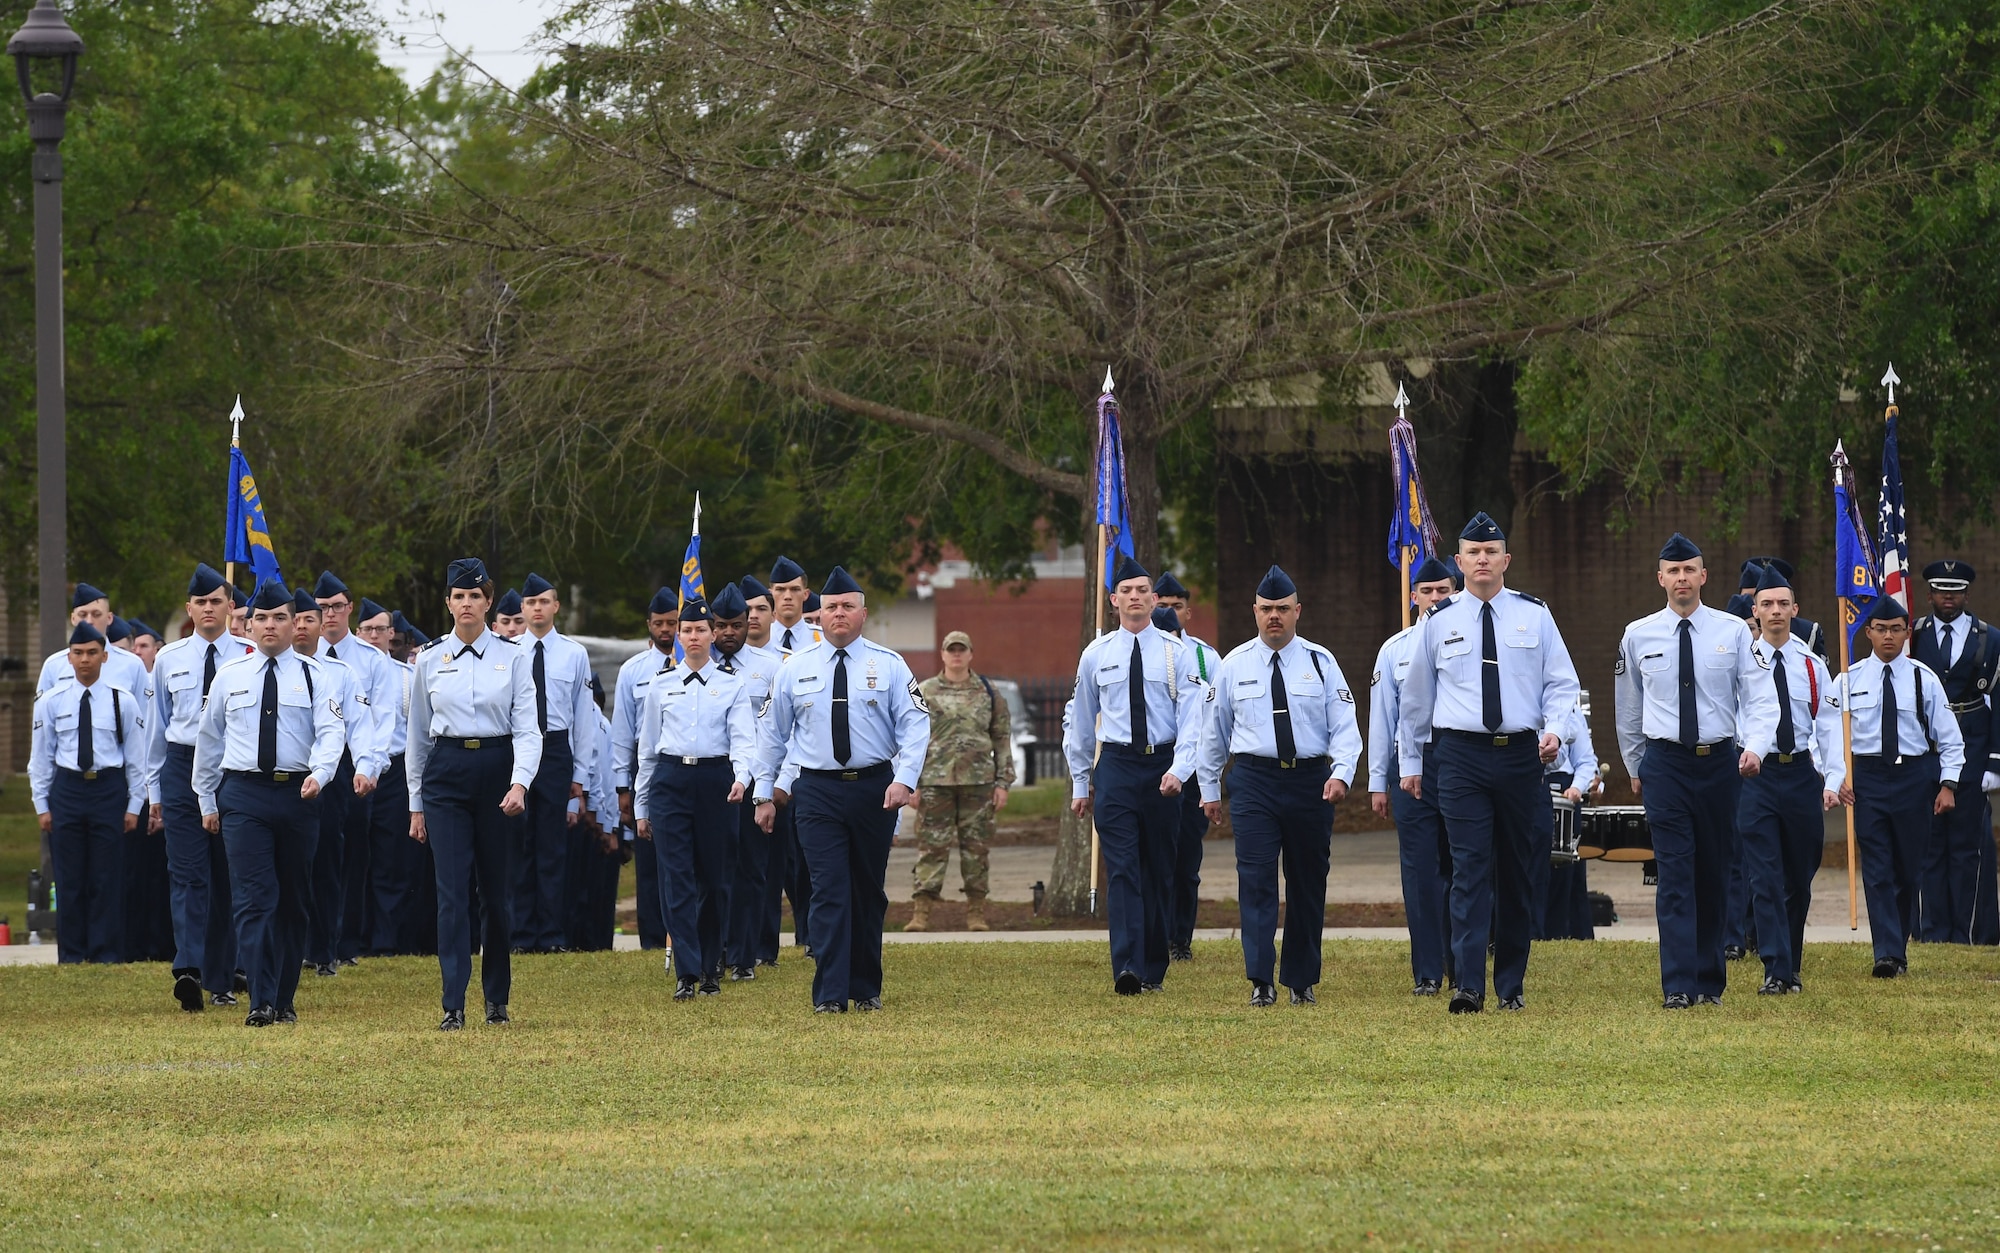 Keesler leadership march in formation during the 81st Training Wing assumption of command ceremony on the Levitow Training Support Facility drill pad at Keesler Air Force Base, Mississippi, March 23, 2023.